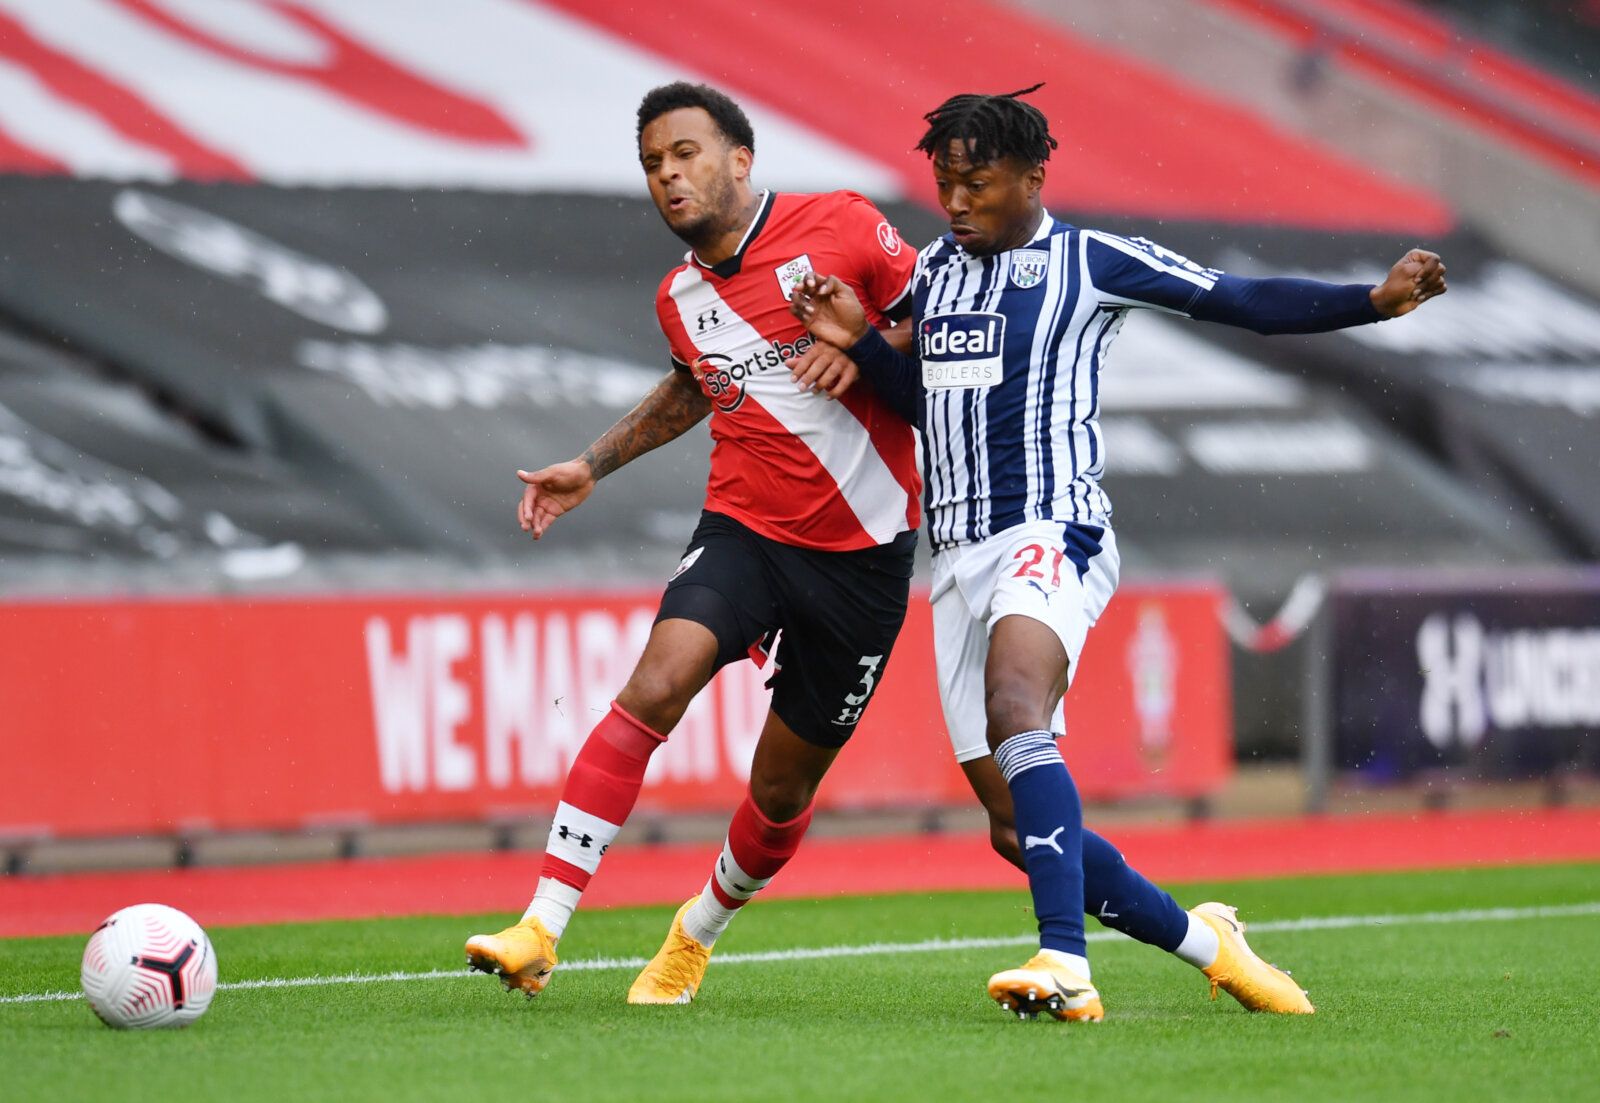 Soccer Football - Premier League - Southampton v West Bromwich Albion - St Mary's Stadium, Southampton, Britain - October 4, 2020 Southampton's Ryan Bertrand in action with West Bromwich Albion's Kyle Edwards Pool via REUTERS/Glyn Kirk EDITORIAL USE ONLY. No use with unauthorized audio, video, data, fixture lists, club/league logos or 'live' services. Online in-match use limited to 75 images, no video emulation. No use in betting, games or single club /league/player publications.  Please contact